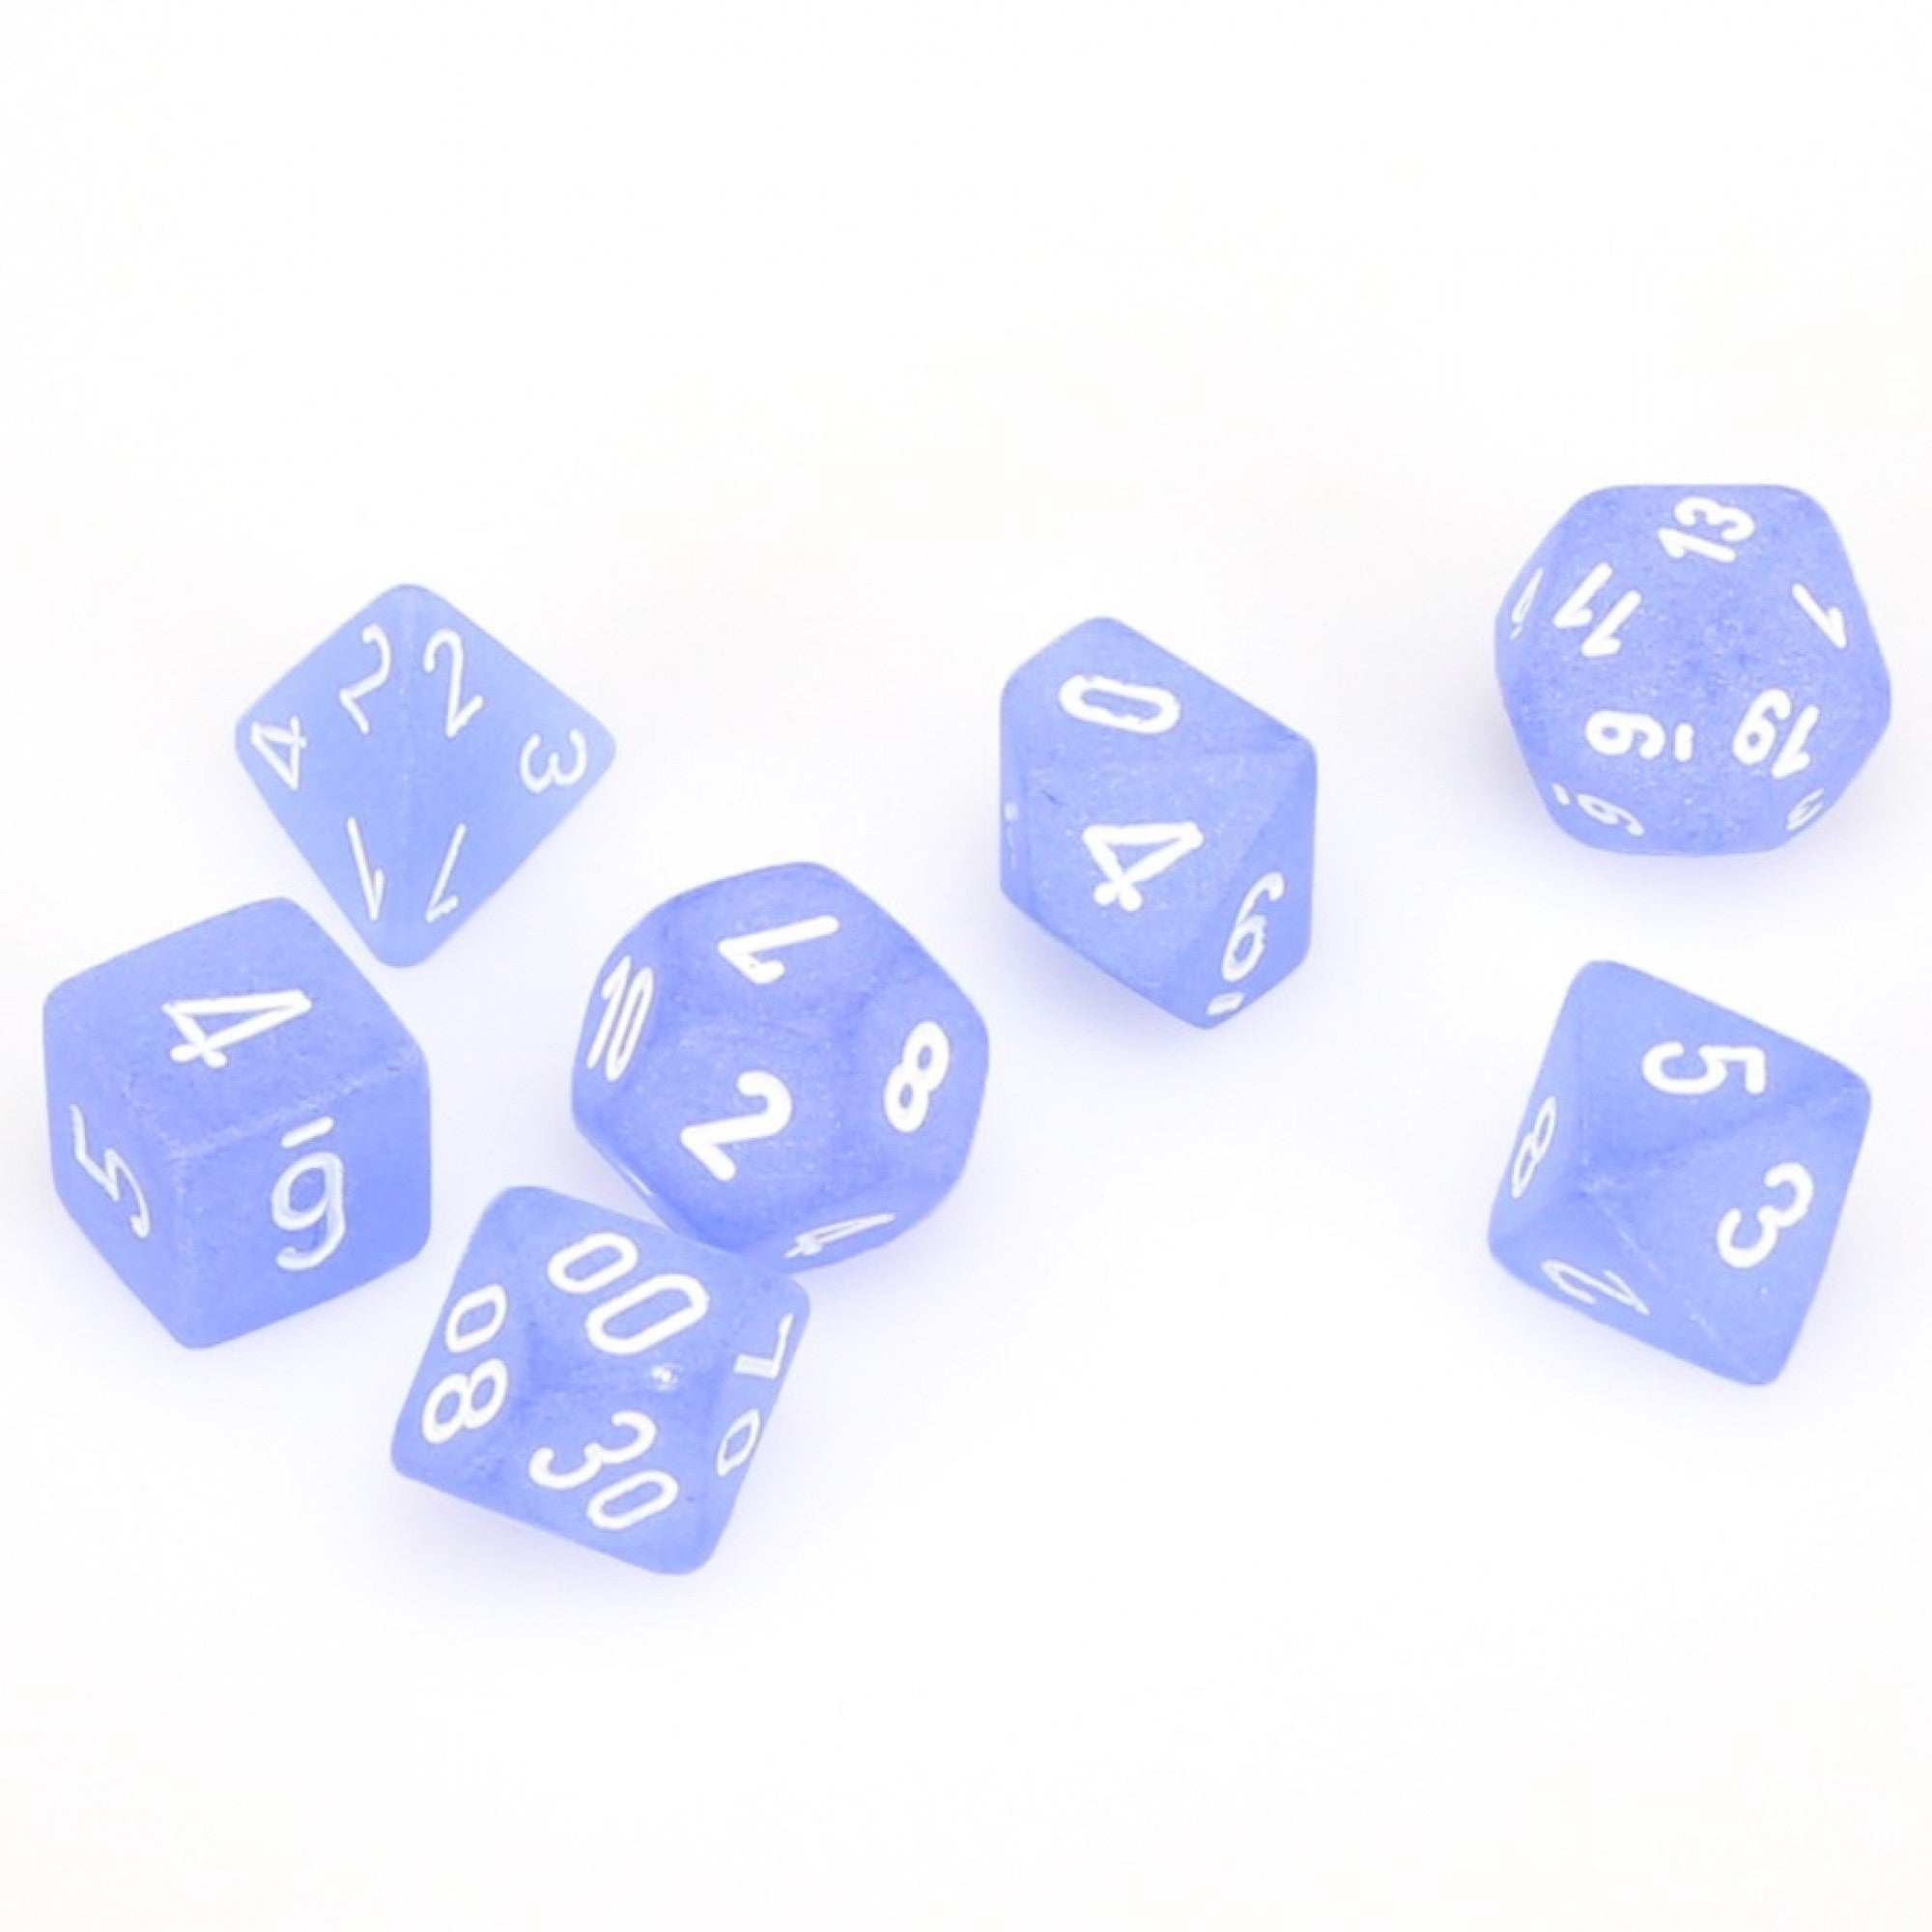 Chessex Frosted Polyhedral 7-Die Set